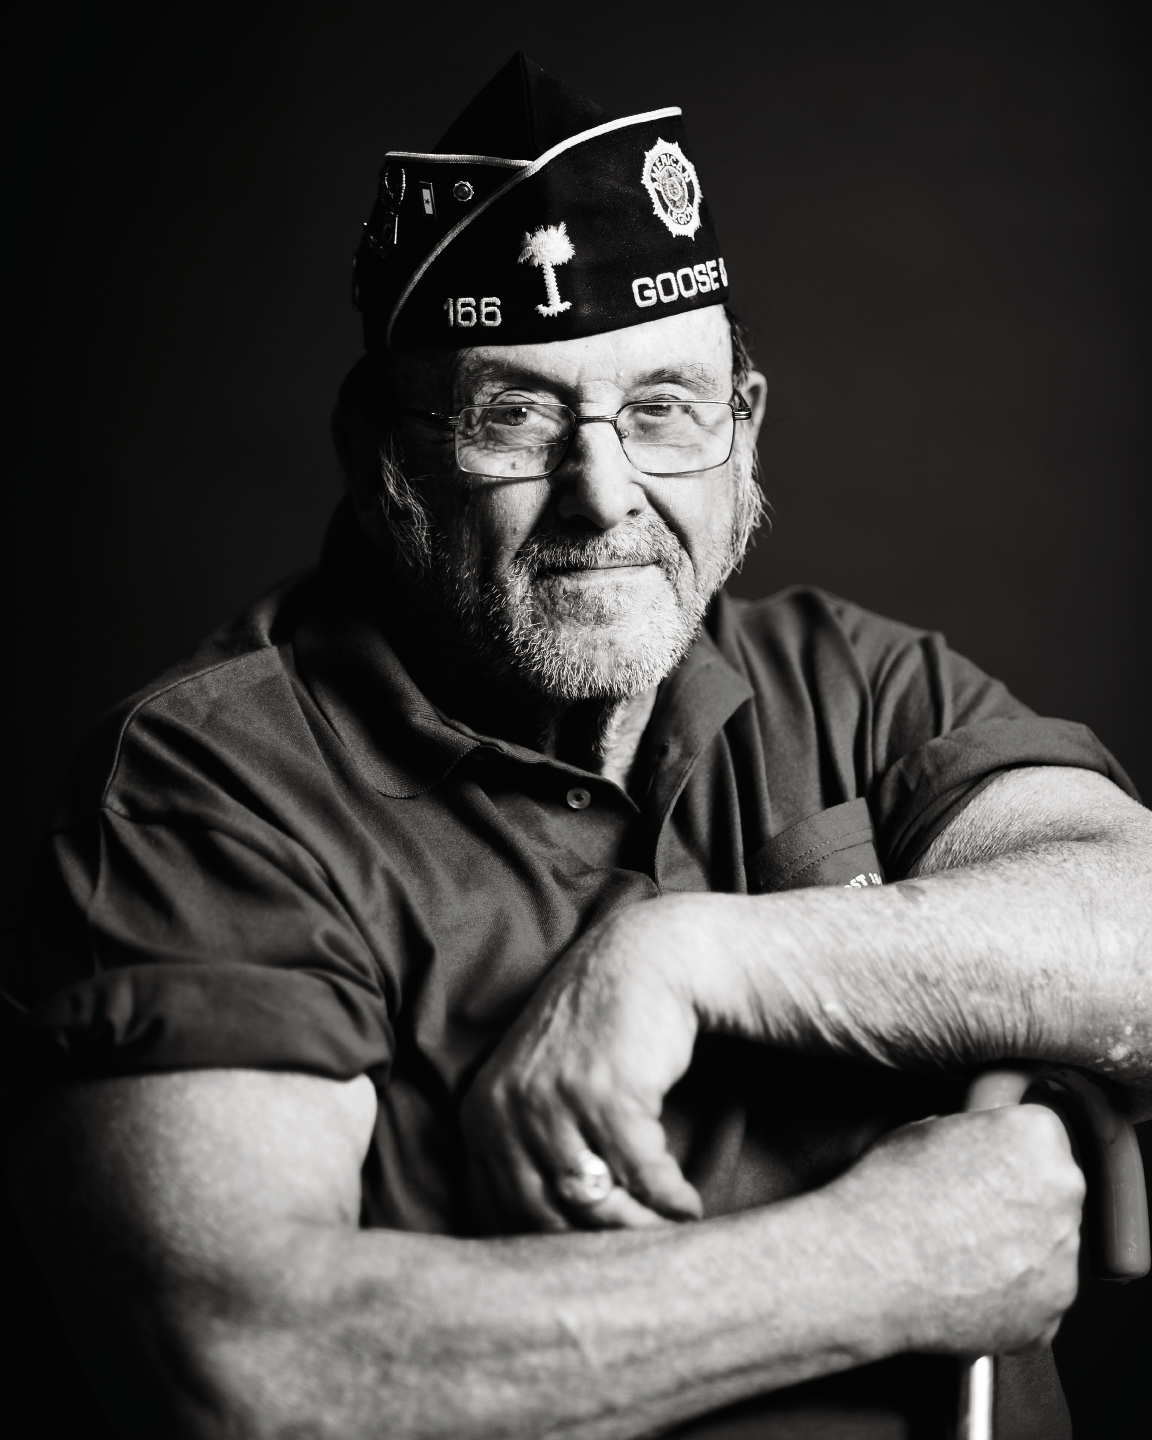 During her rehab, Pearsall began the “Veterans Portrait Project,” some images from which are on permanent display at the Ralph H. Johnson VA Medical Center in Charleston. Ron DeMallo